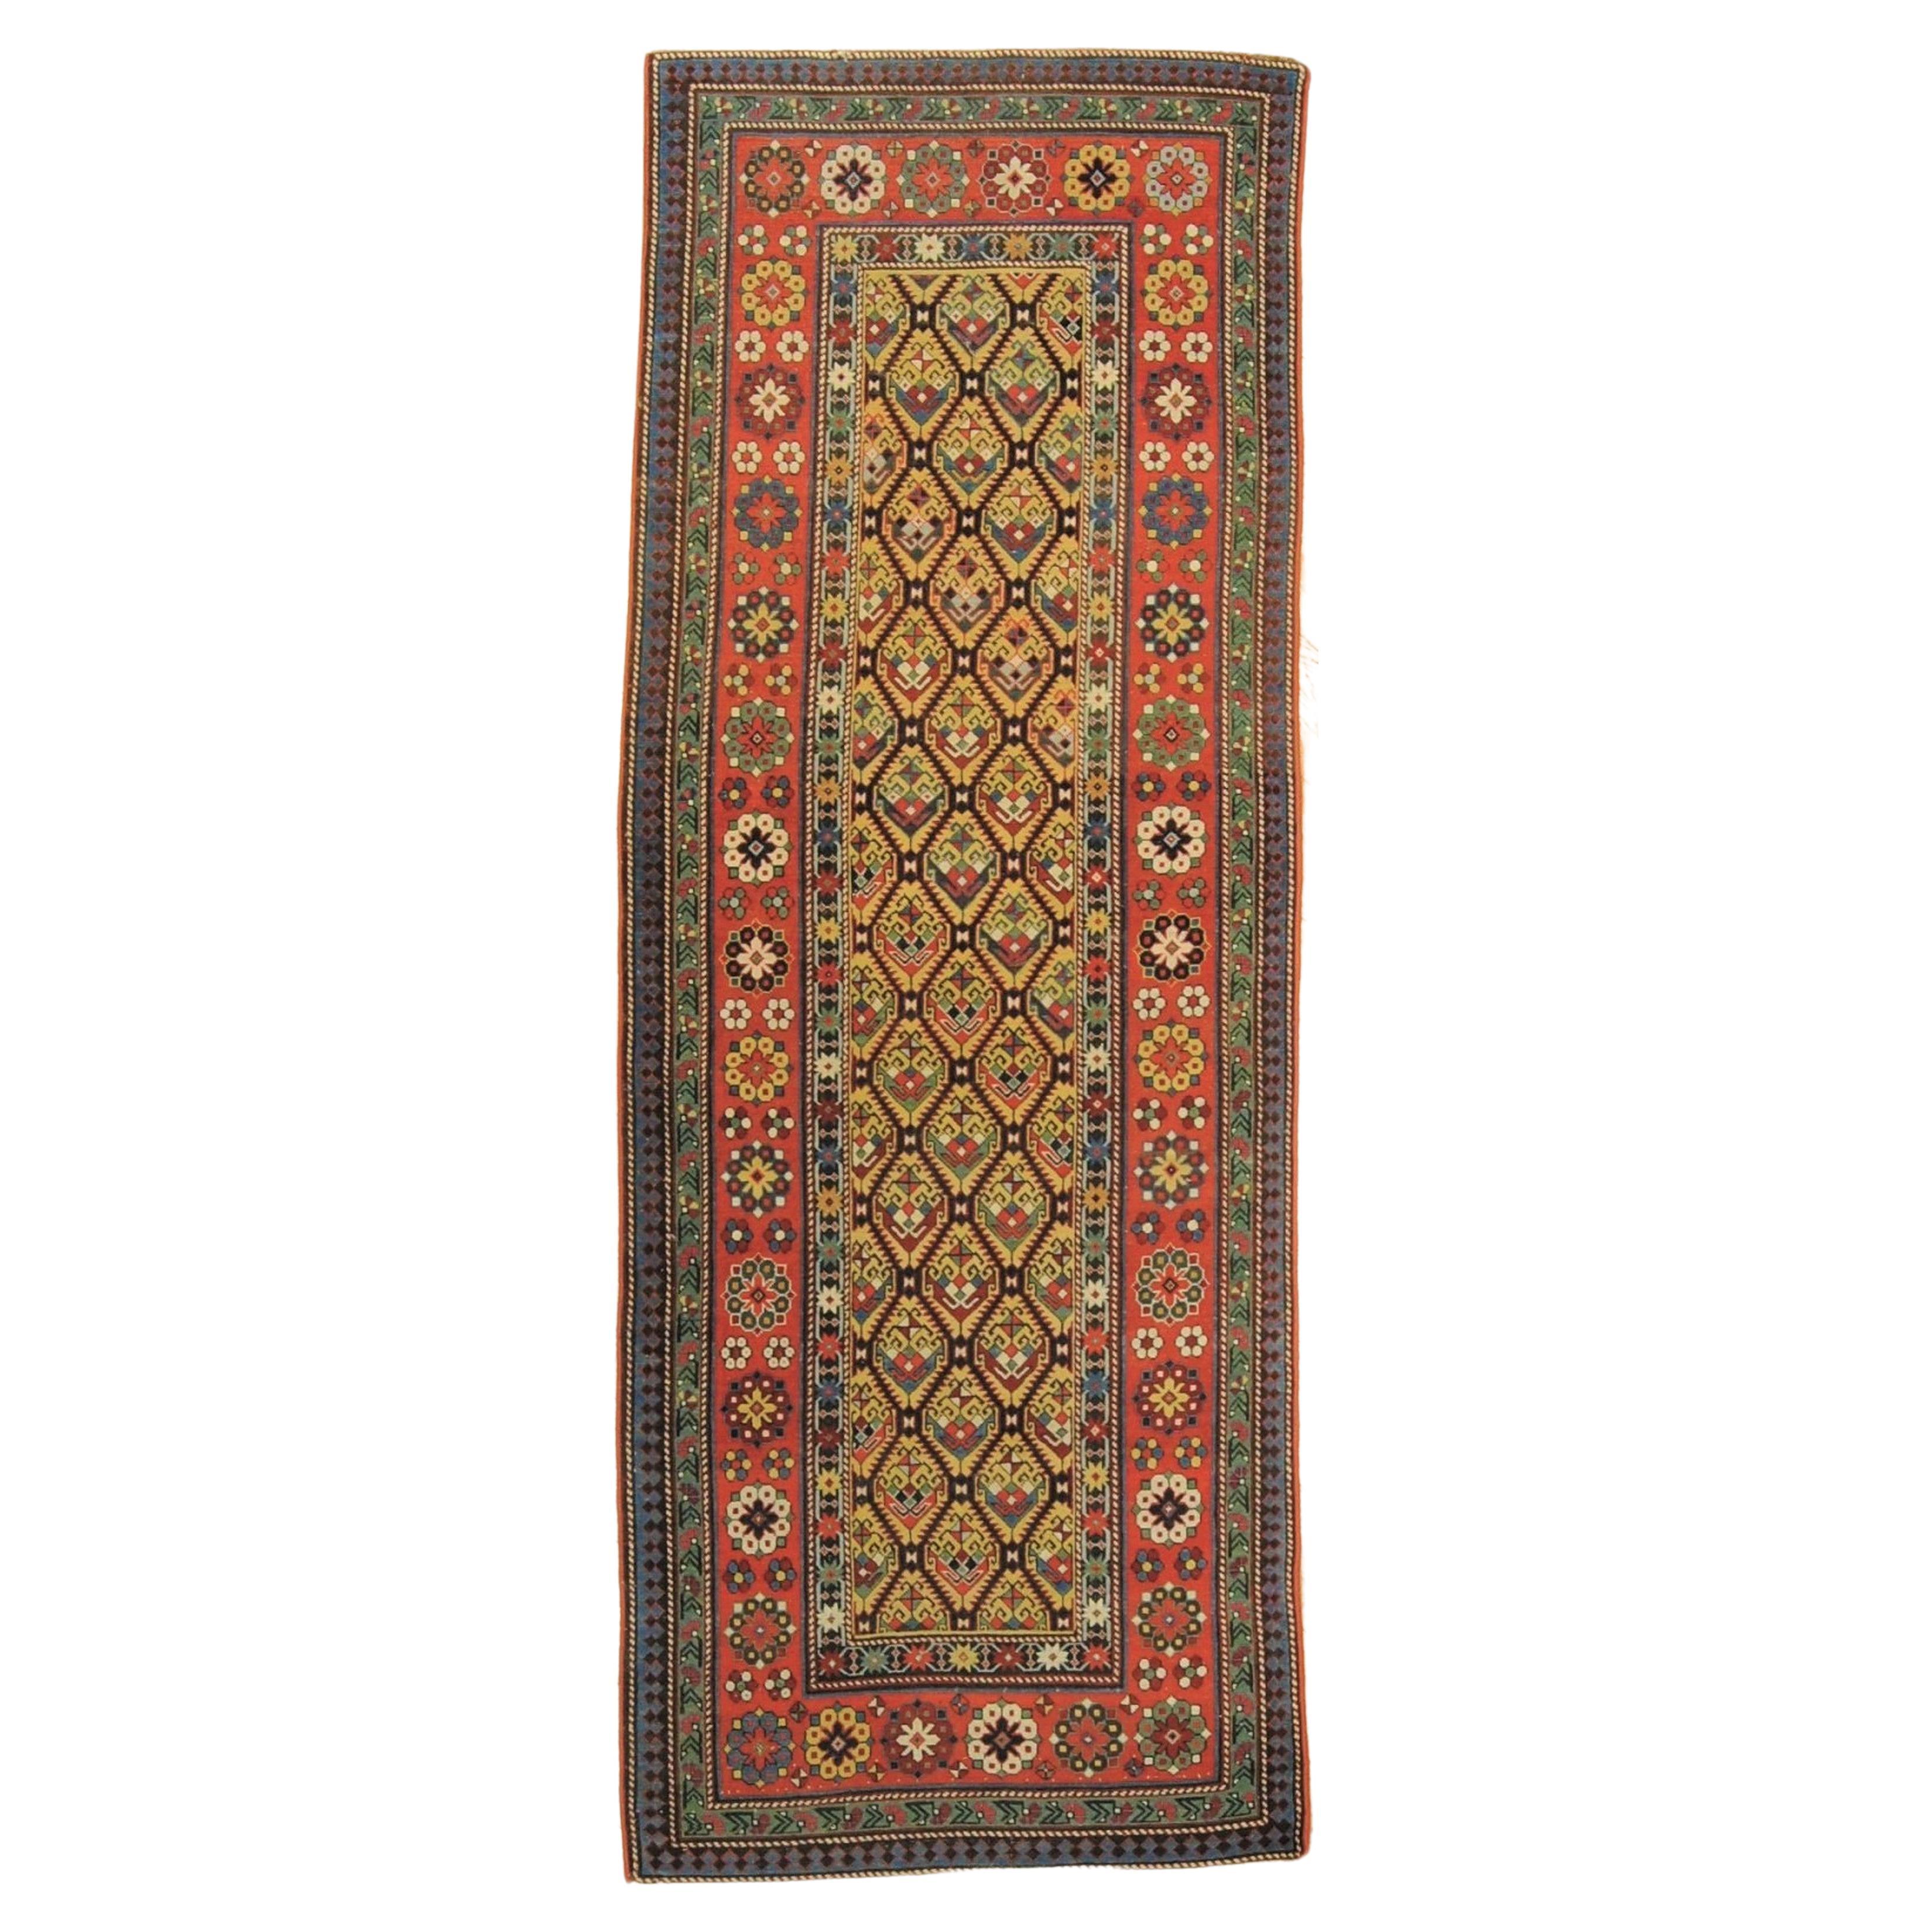 19th Century Rare Yellow and Red with Flowers and Boté Caucasian Talish, ca 1890